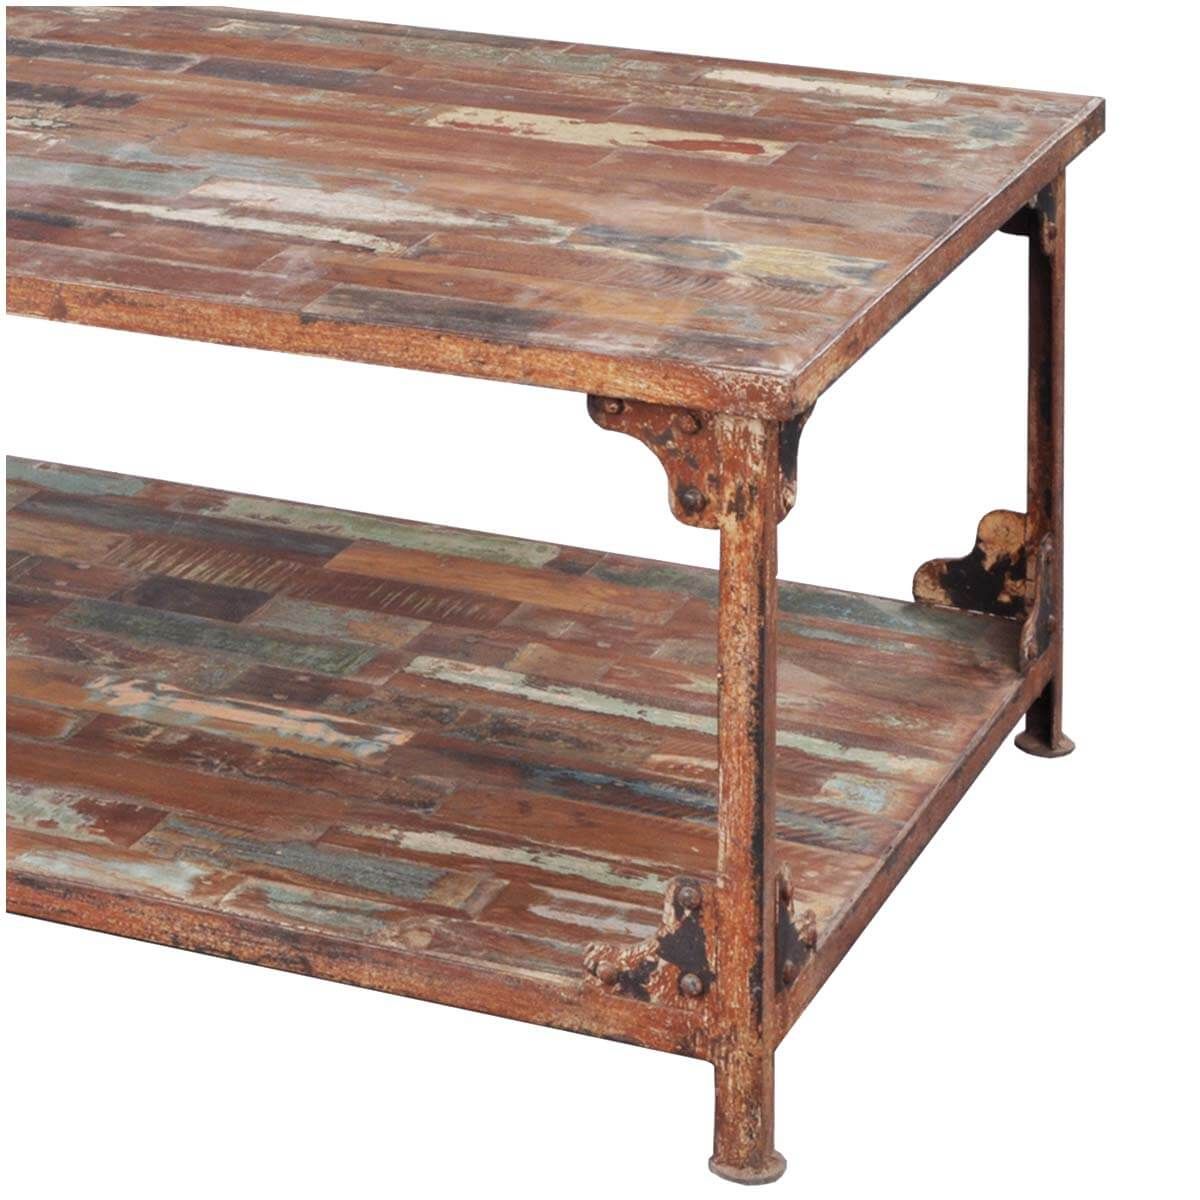 Distressed Reclaimed Wood Wrought Iron Industrial Rustic Coffee Table Regarding Distressed Iron 4 Shelf Desks (View 4 of 15)